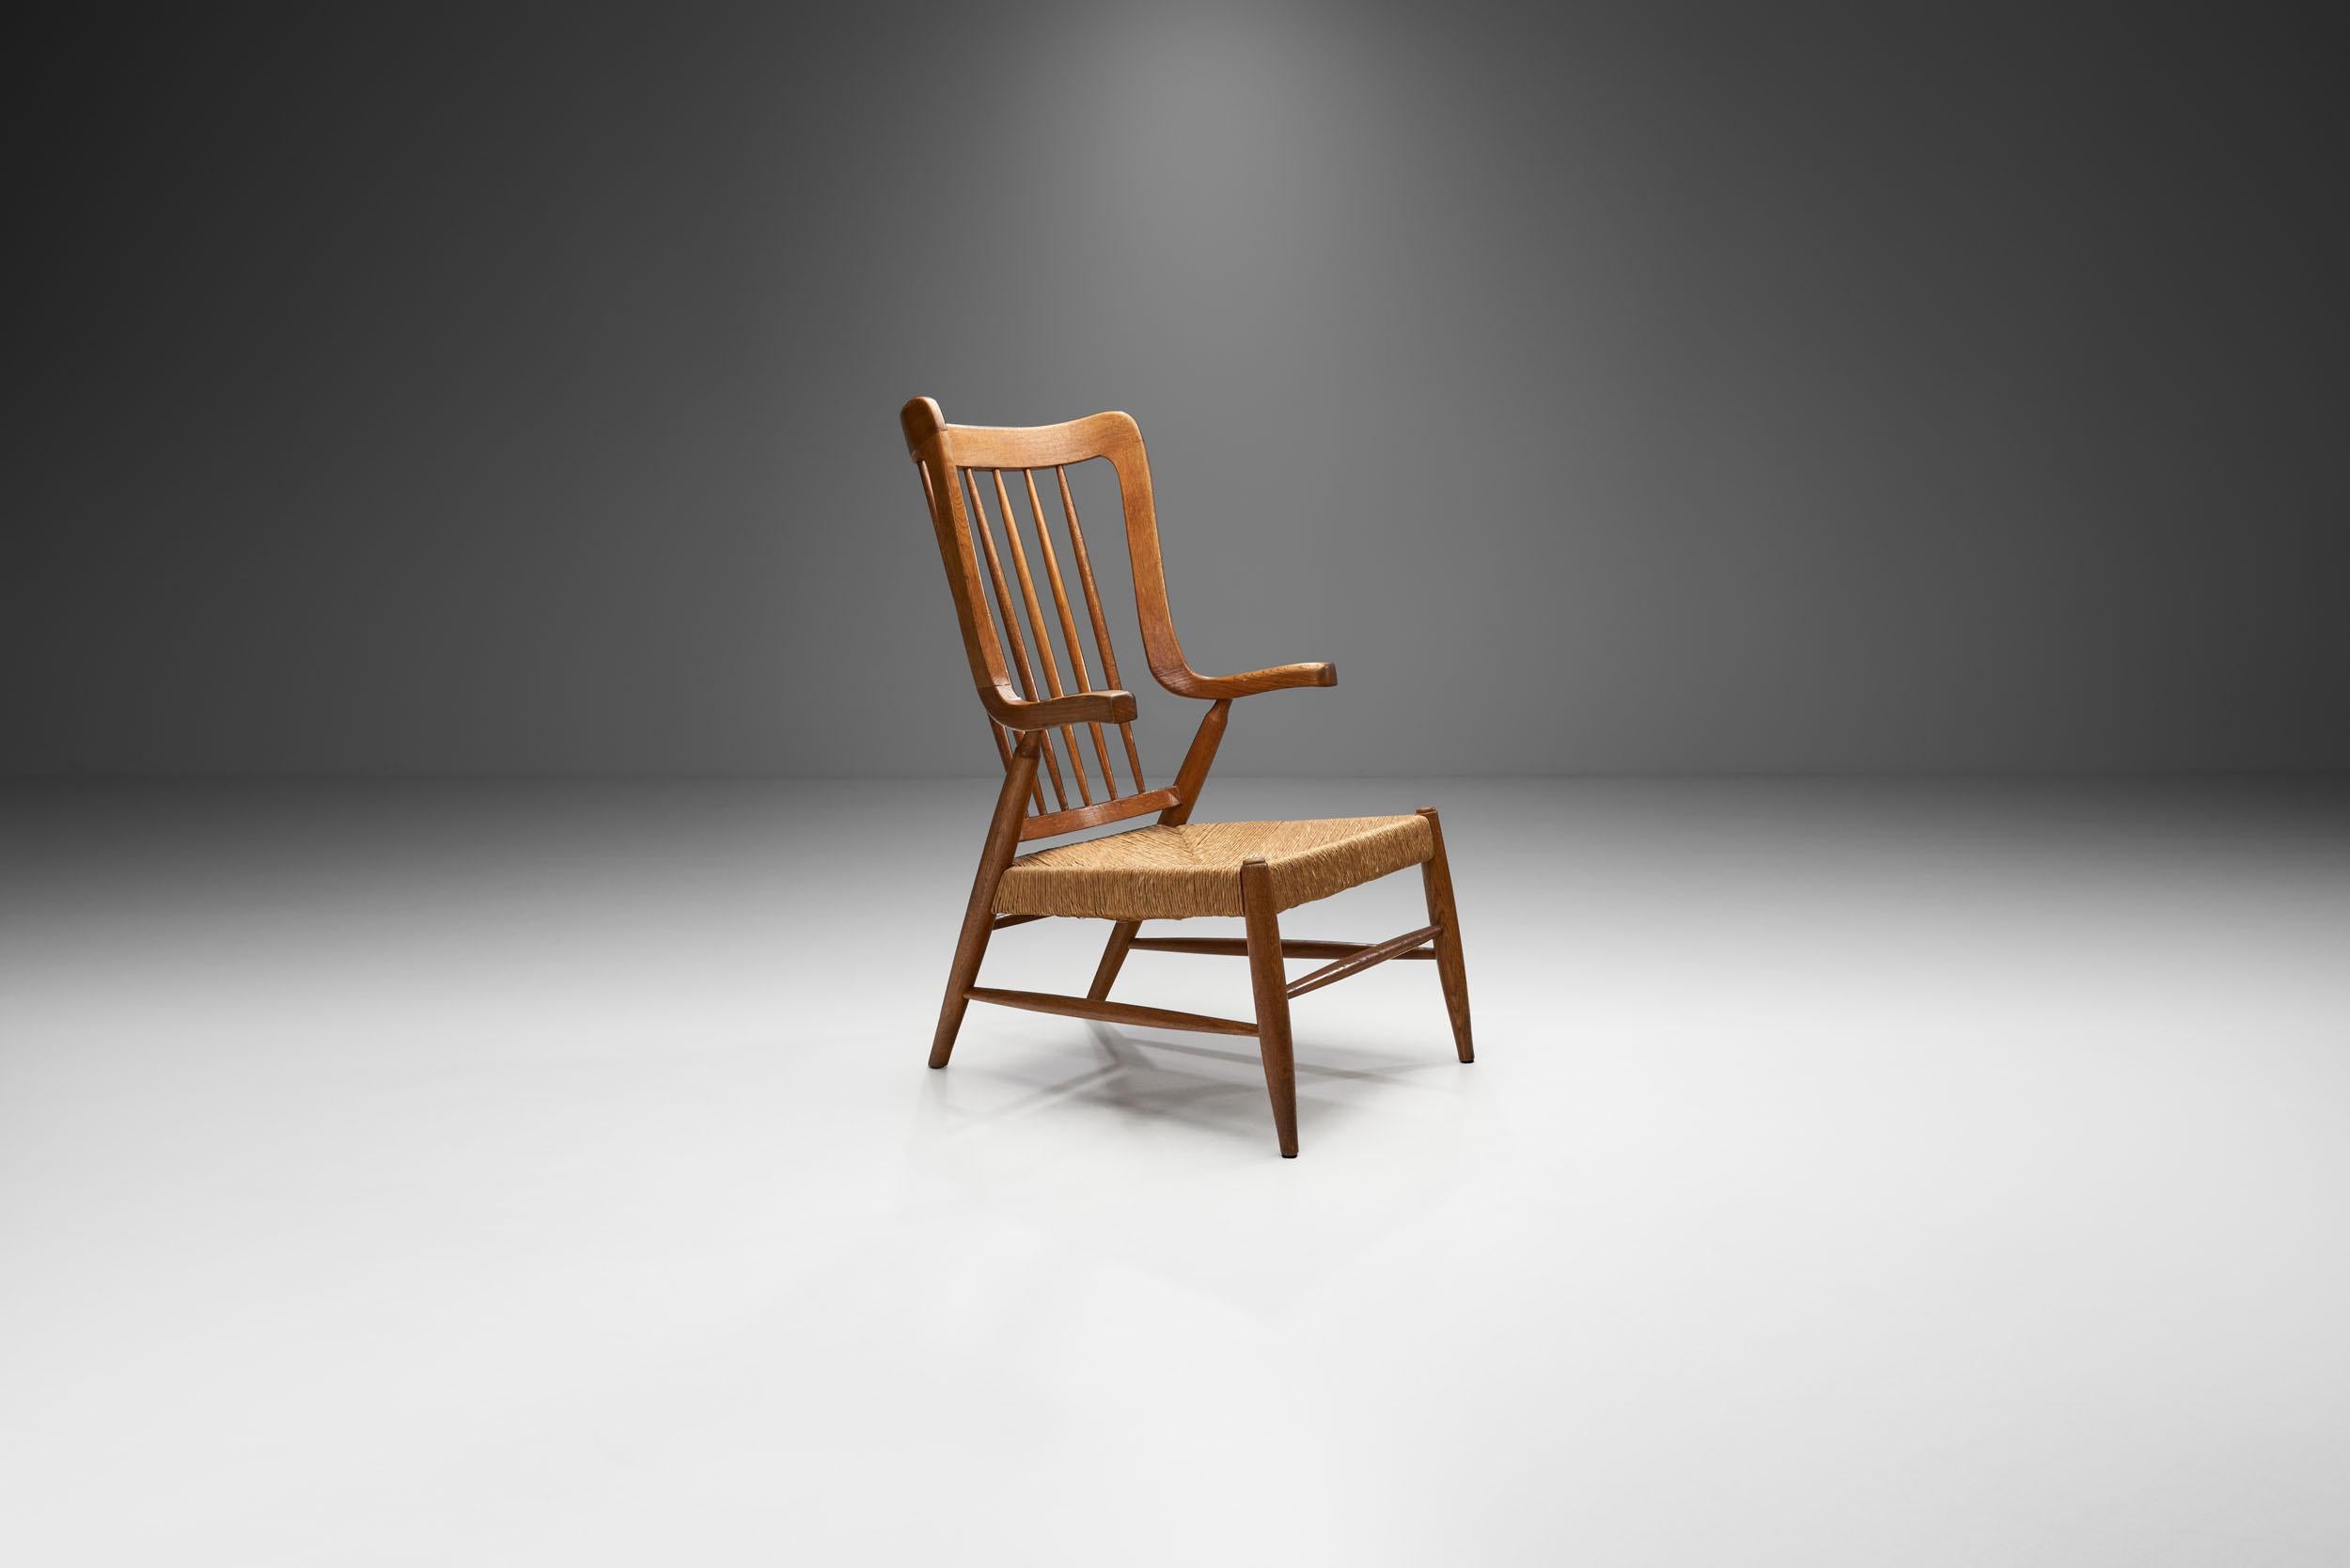 The elements of this chair are very typical of the 1950s’ design of the Netherlands. While the individual design elements are traditional, the quirky shape of the armrests is very unique, and never seen before. Only a rocking chair is known in